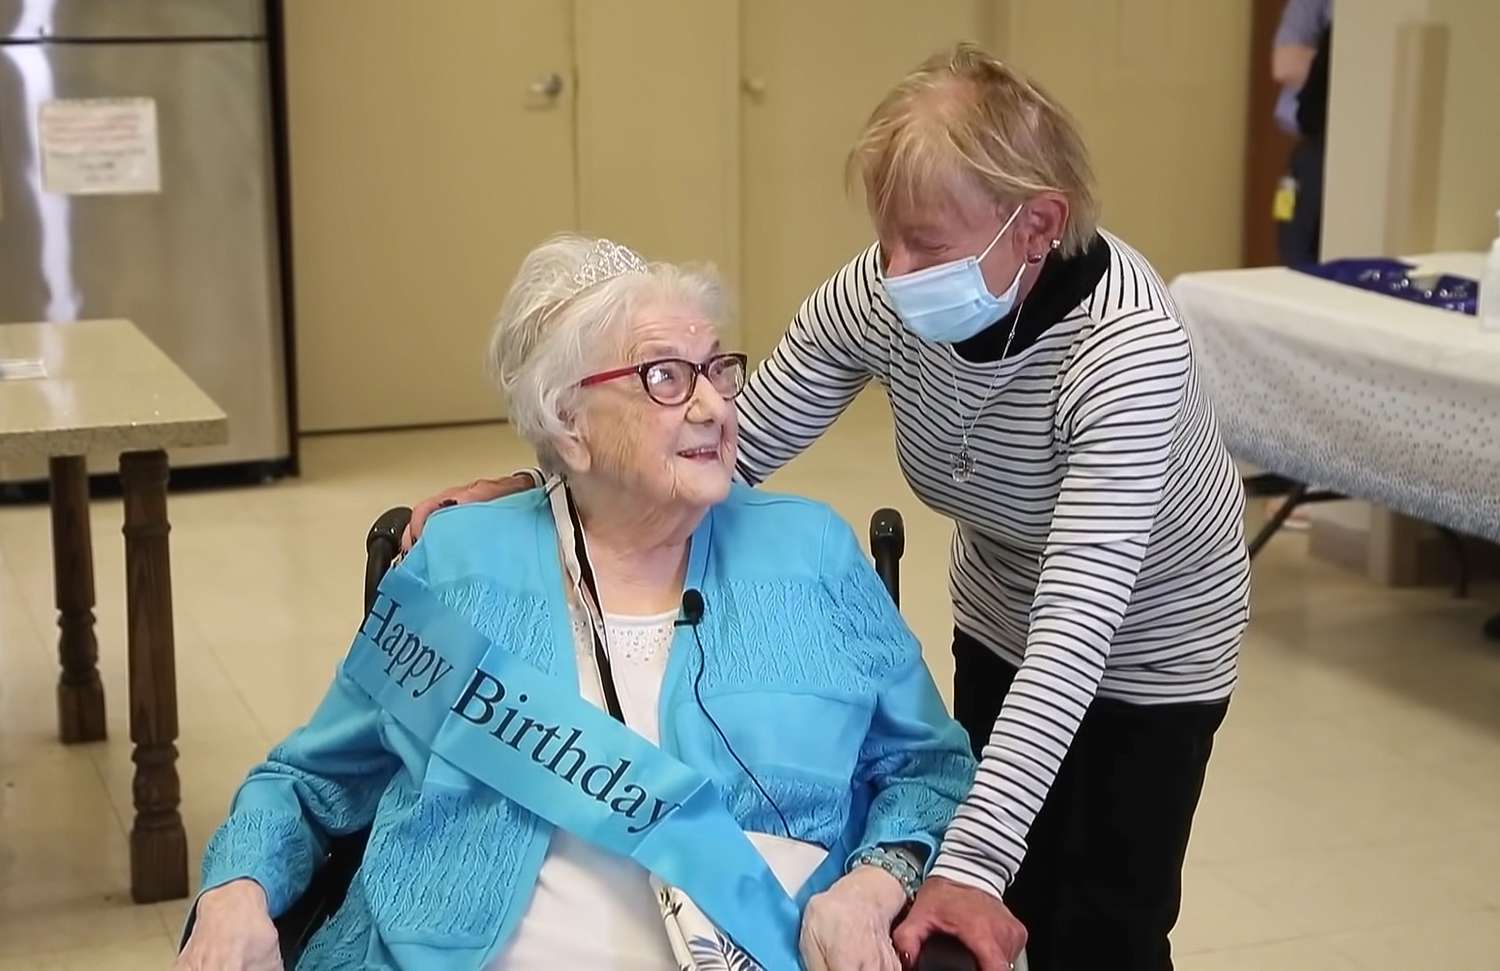 Jewish Woman Reunites with Daughter, Whom She Placed for Adoption amid WWII, at Her 98th Birthday Party